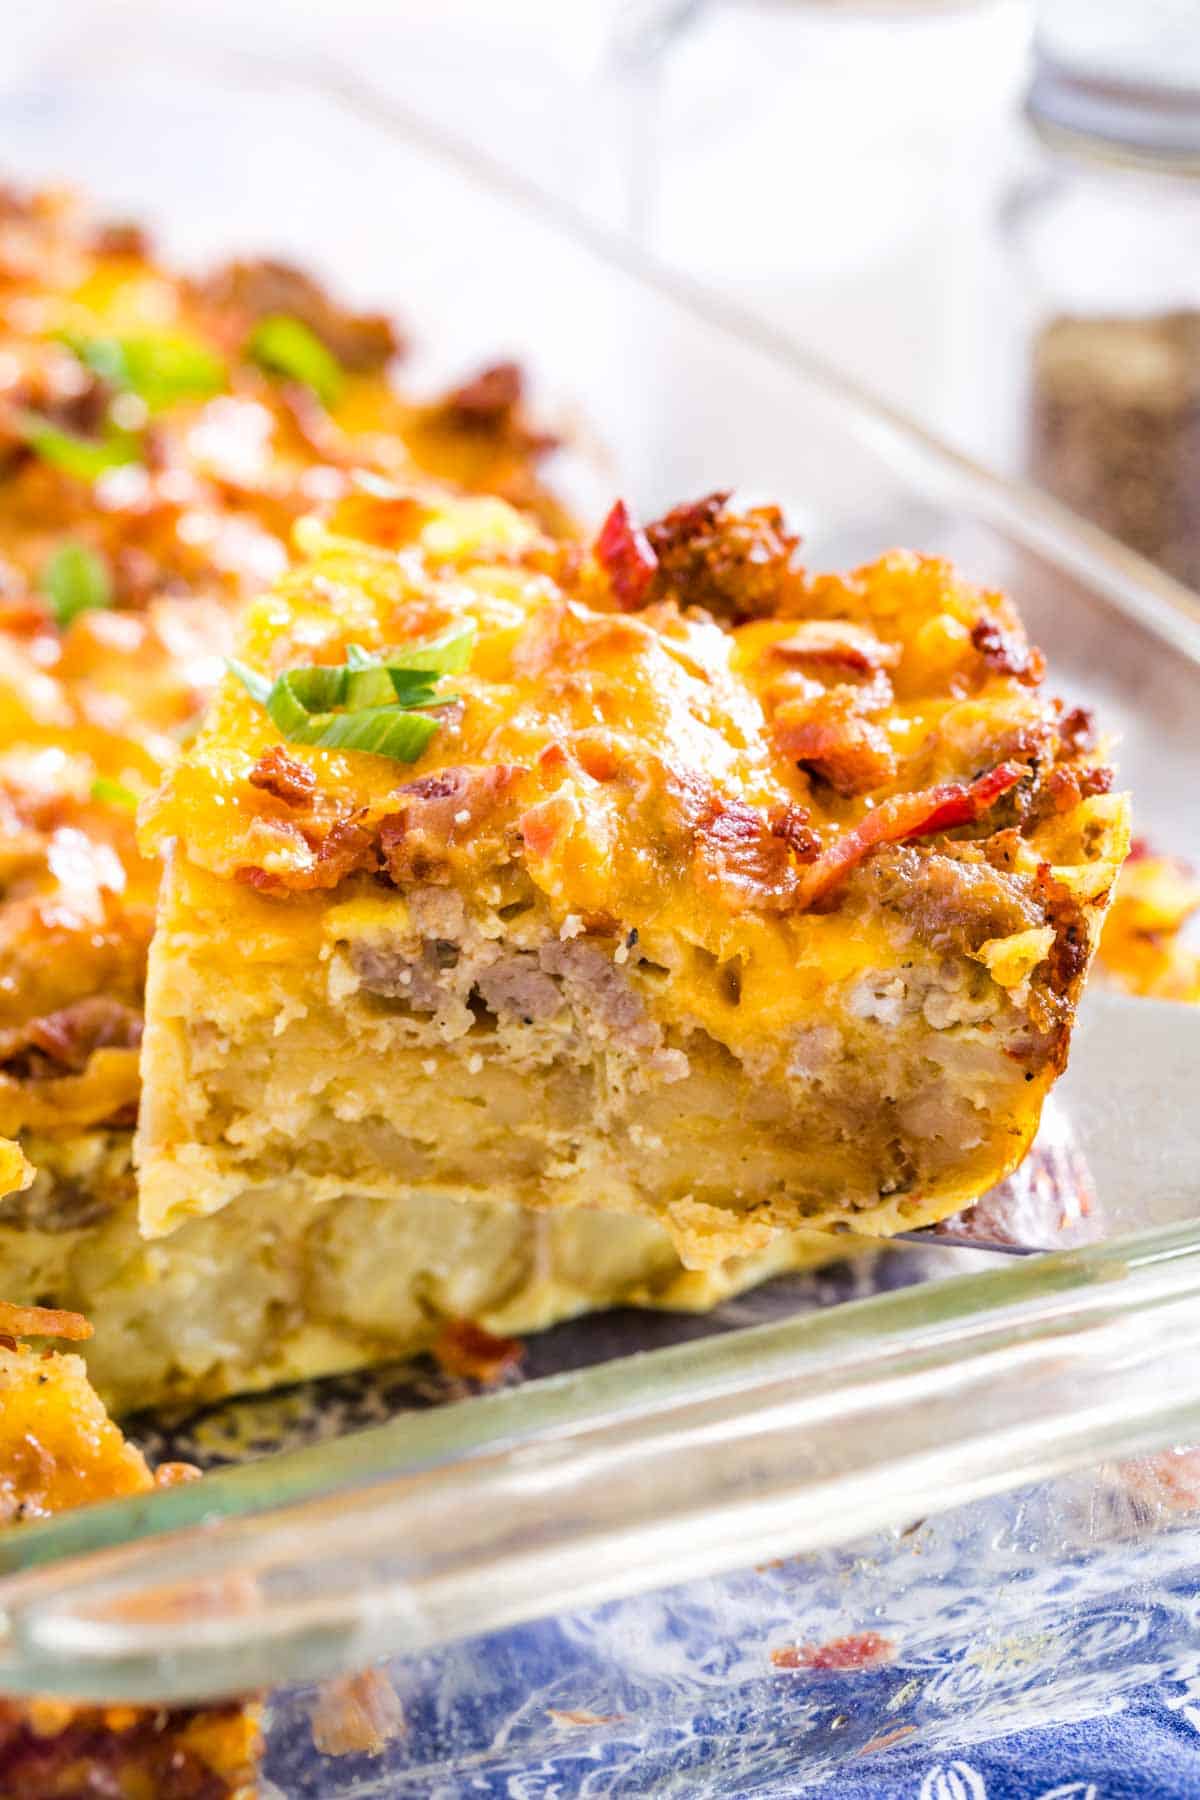 A glass baking dish is shown full of tater tot breakfast casserole.